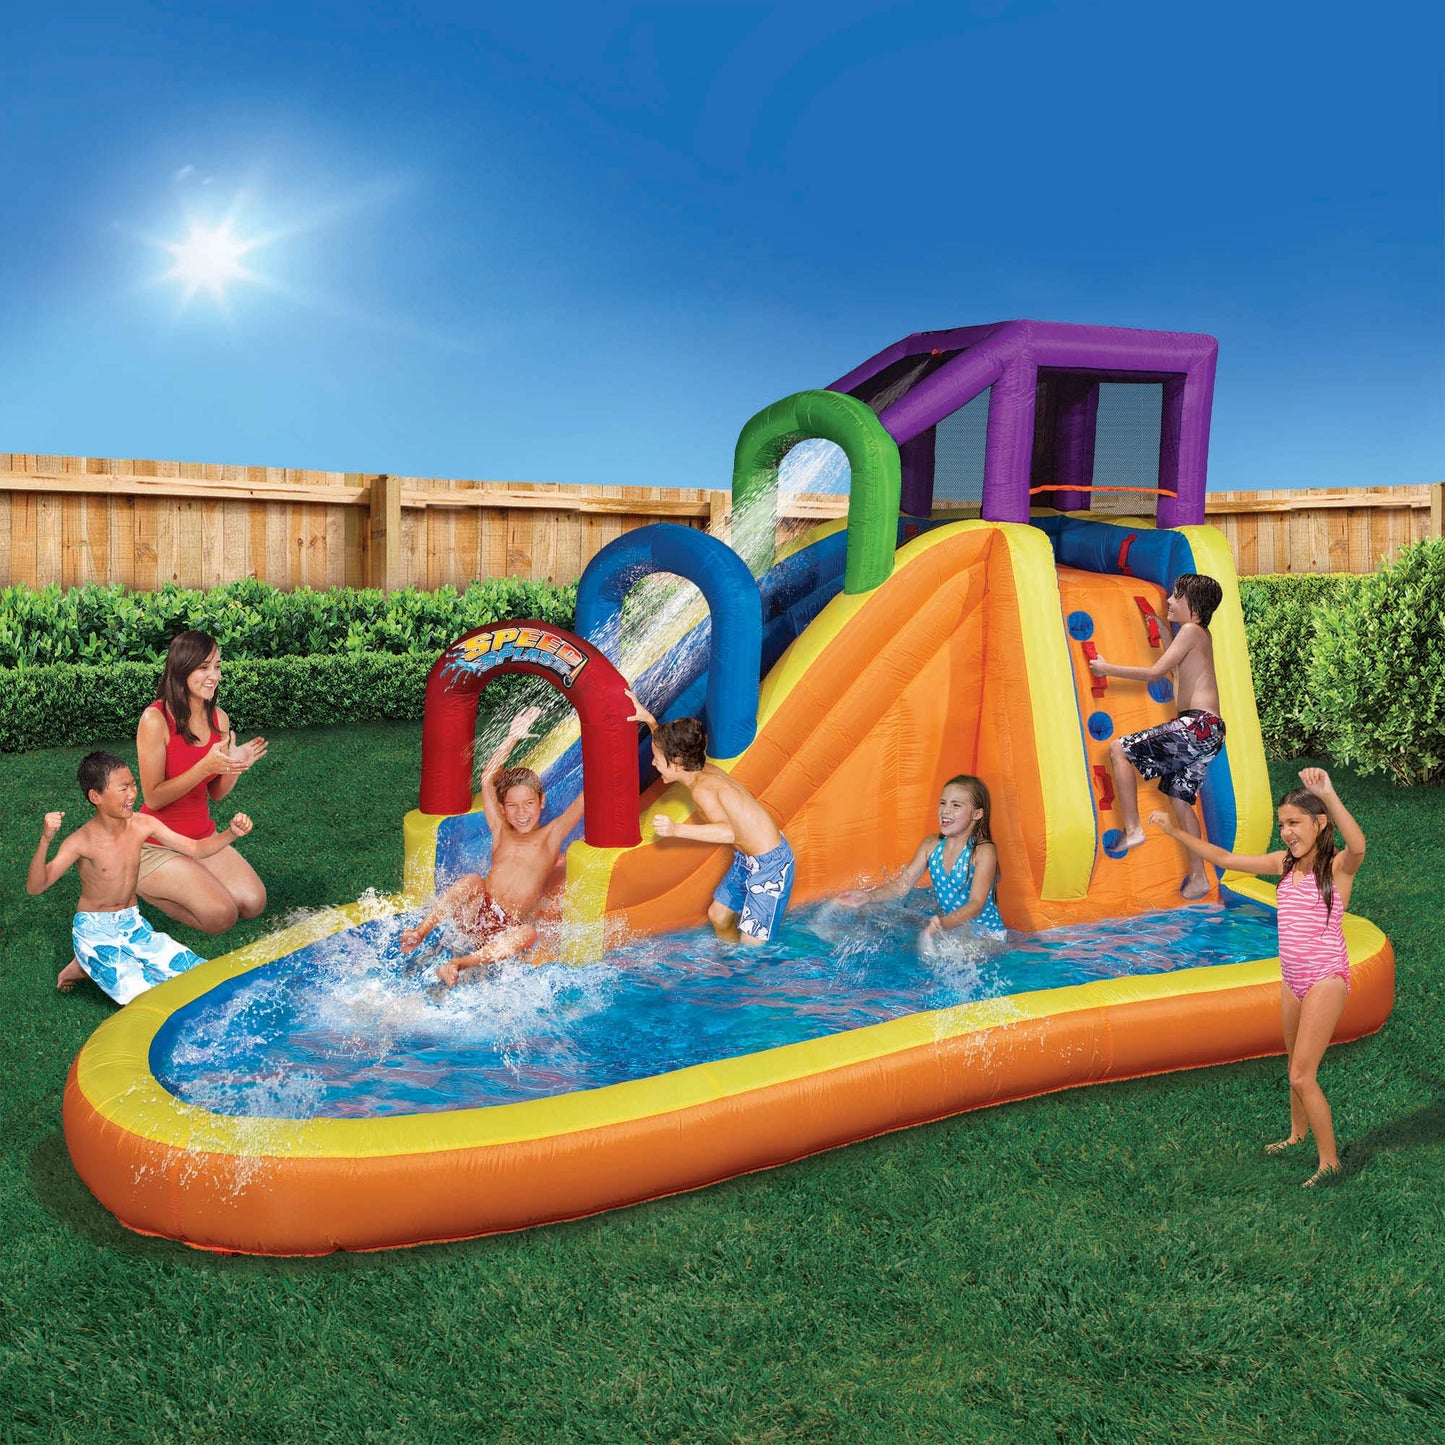 BANZAI Speed Slide Water Park, Length: 14 ft 7 in, Width: 9 ft 6 in, Height: 8 ft, Inflatable Outdoor Backyard Water Slide Splash Bounce Climbing Toy